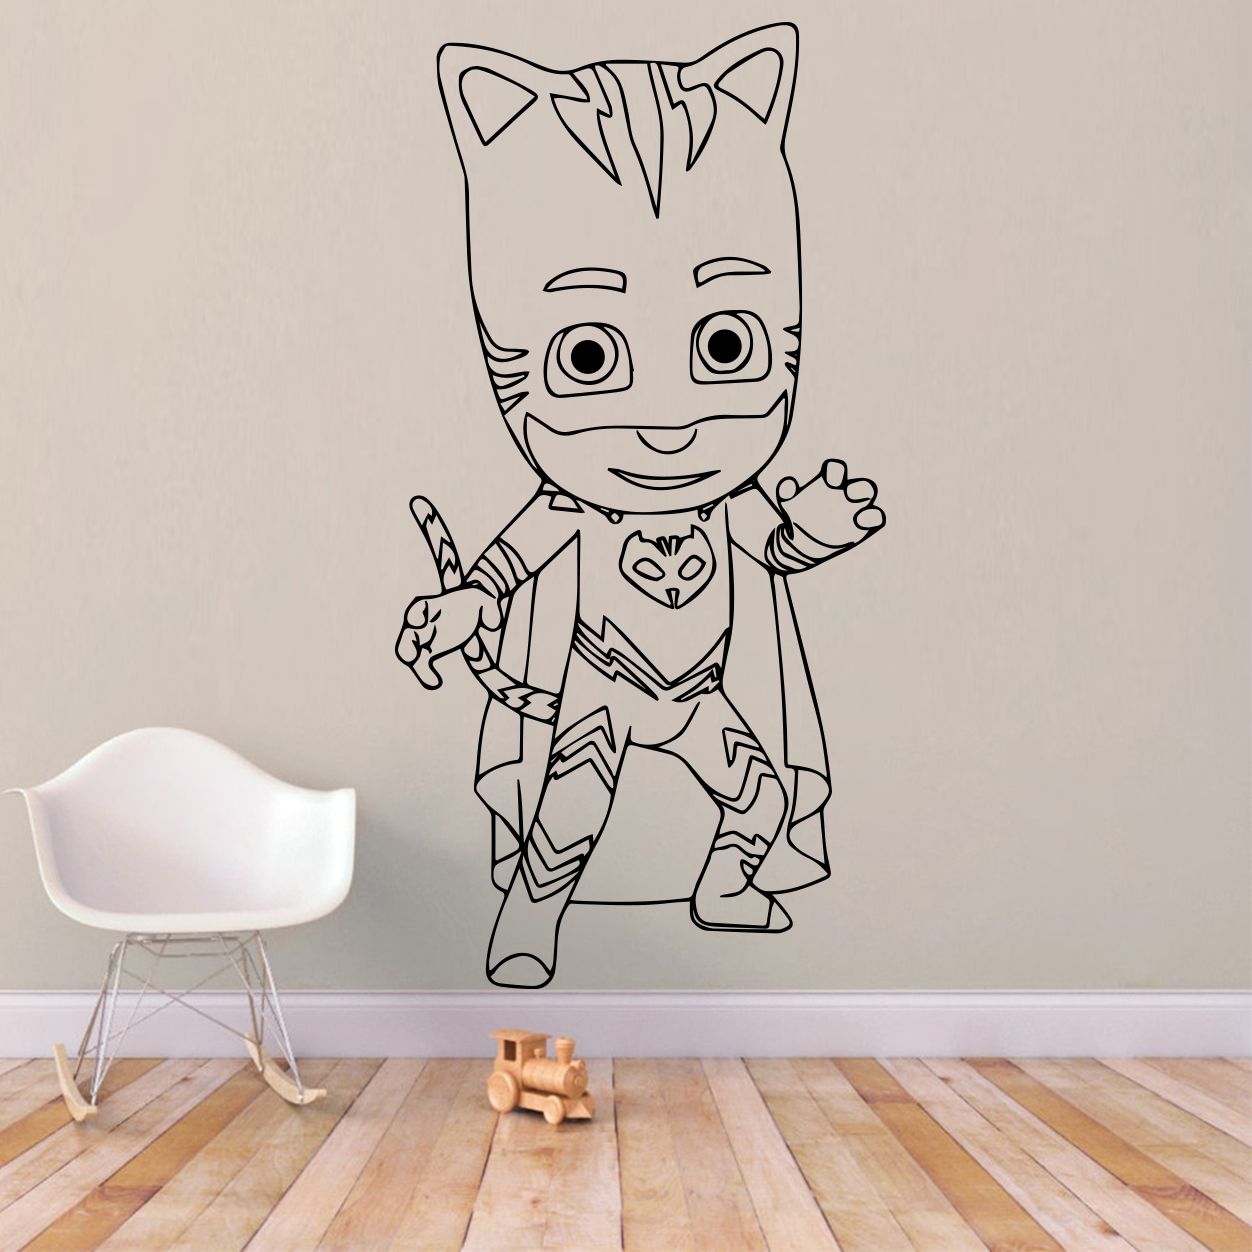 Catboy Wall Decal - Kuarki - Lifestyle Solutions